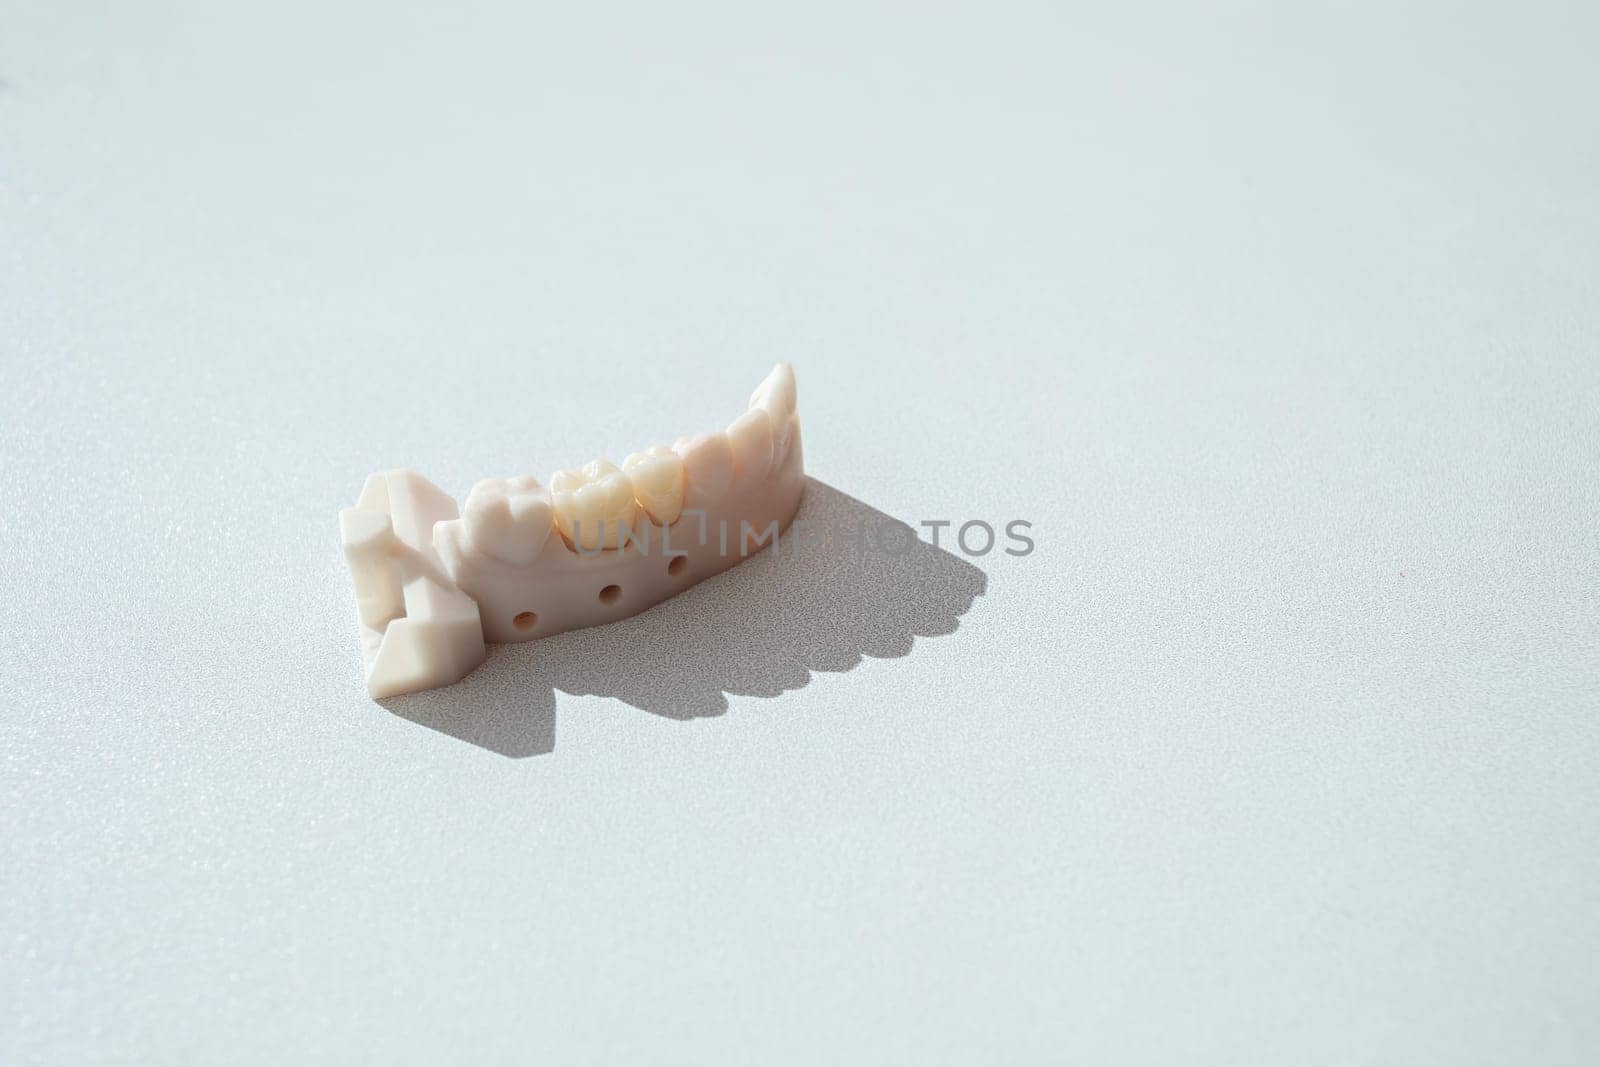 Top View Teeth Crowns, Bridge Dental Equipment Model For Tooth Restoration. Inserting Or Placing Procedure Of Ceramic Dental Crown. Horizontal View, Space For Text. Dentistry by netatsi